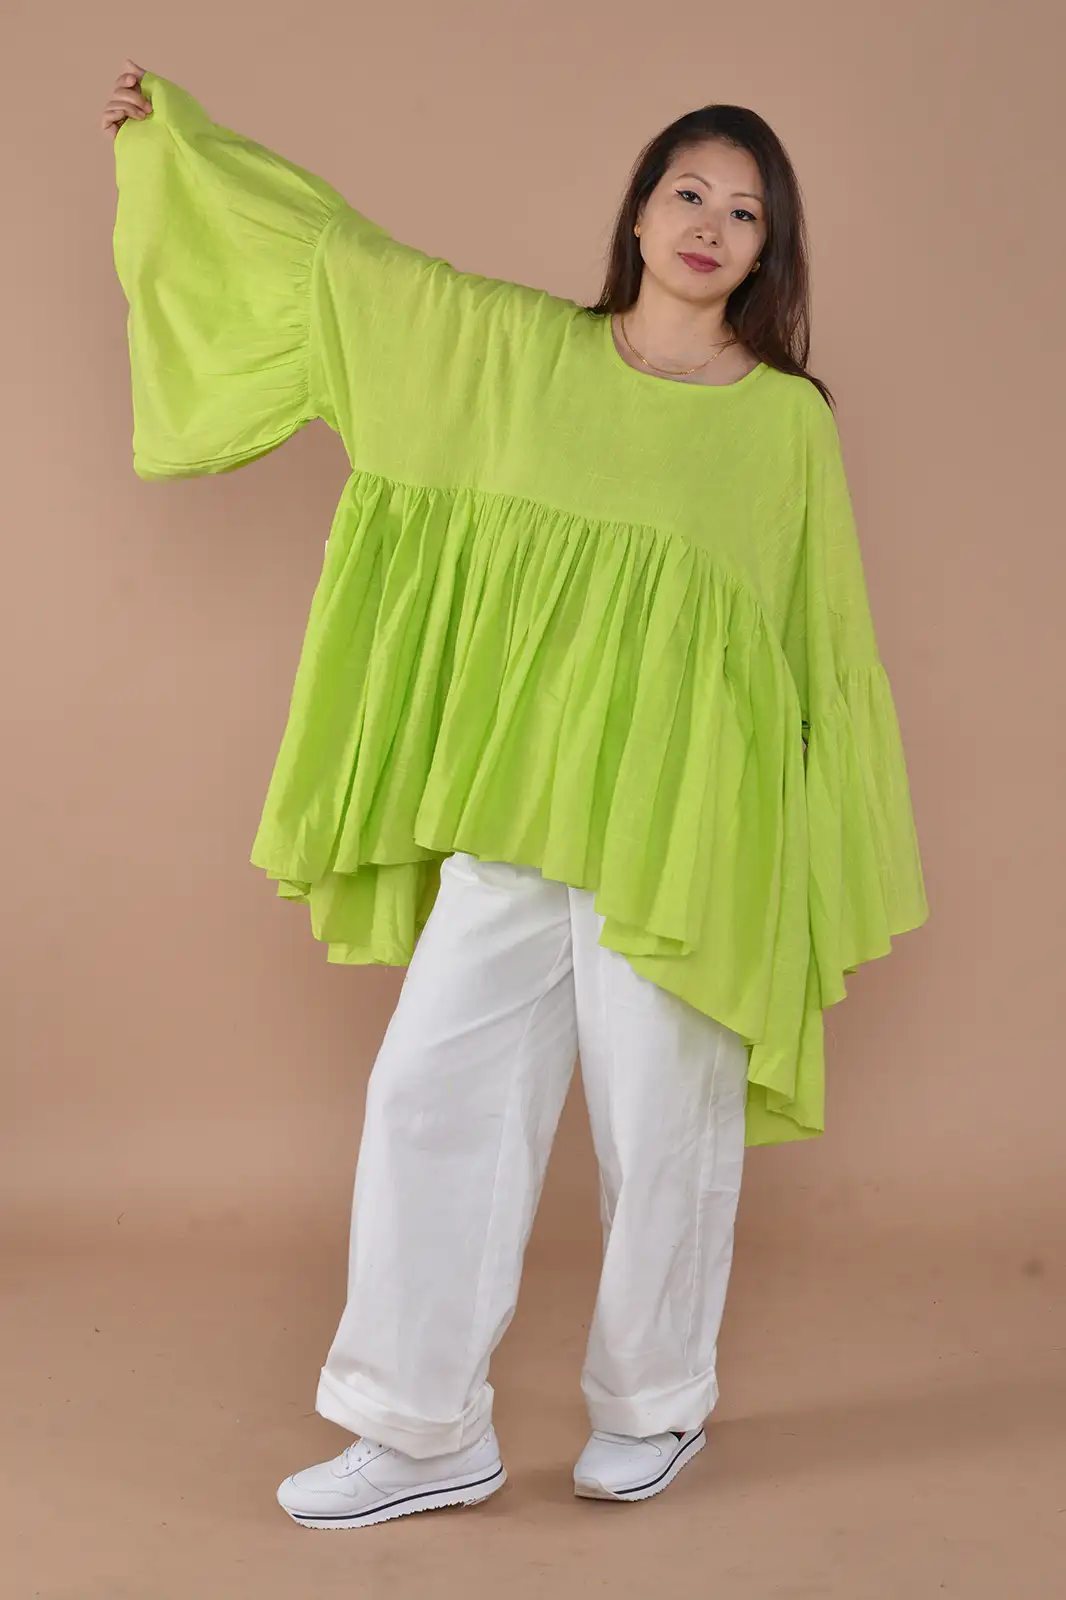 tarini oversized top solid lime green, oversized top for women, oversized t shirt, oversized t shirt women, oversized t shirt women, top for women, women clothing, organic clothing, trendy top for women, stylish top for women, full sleeves top for women, Sepia Stories